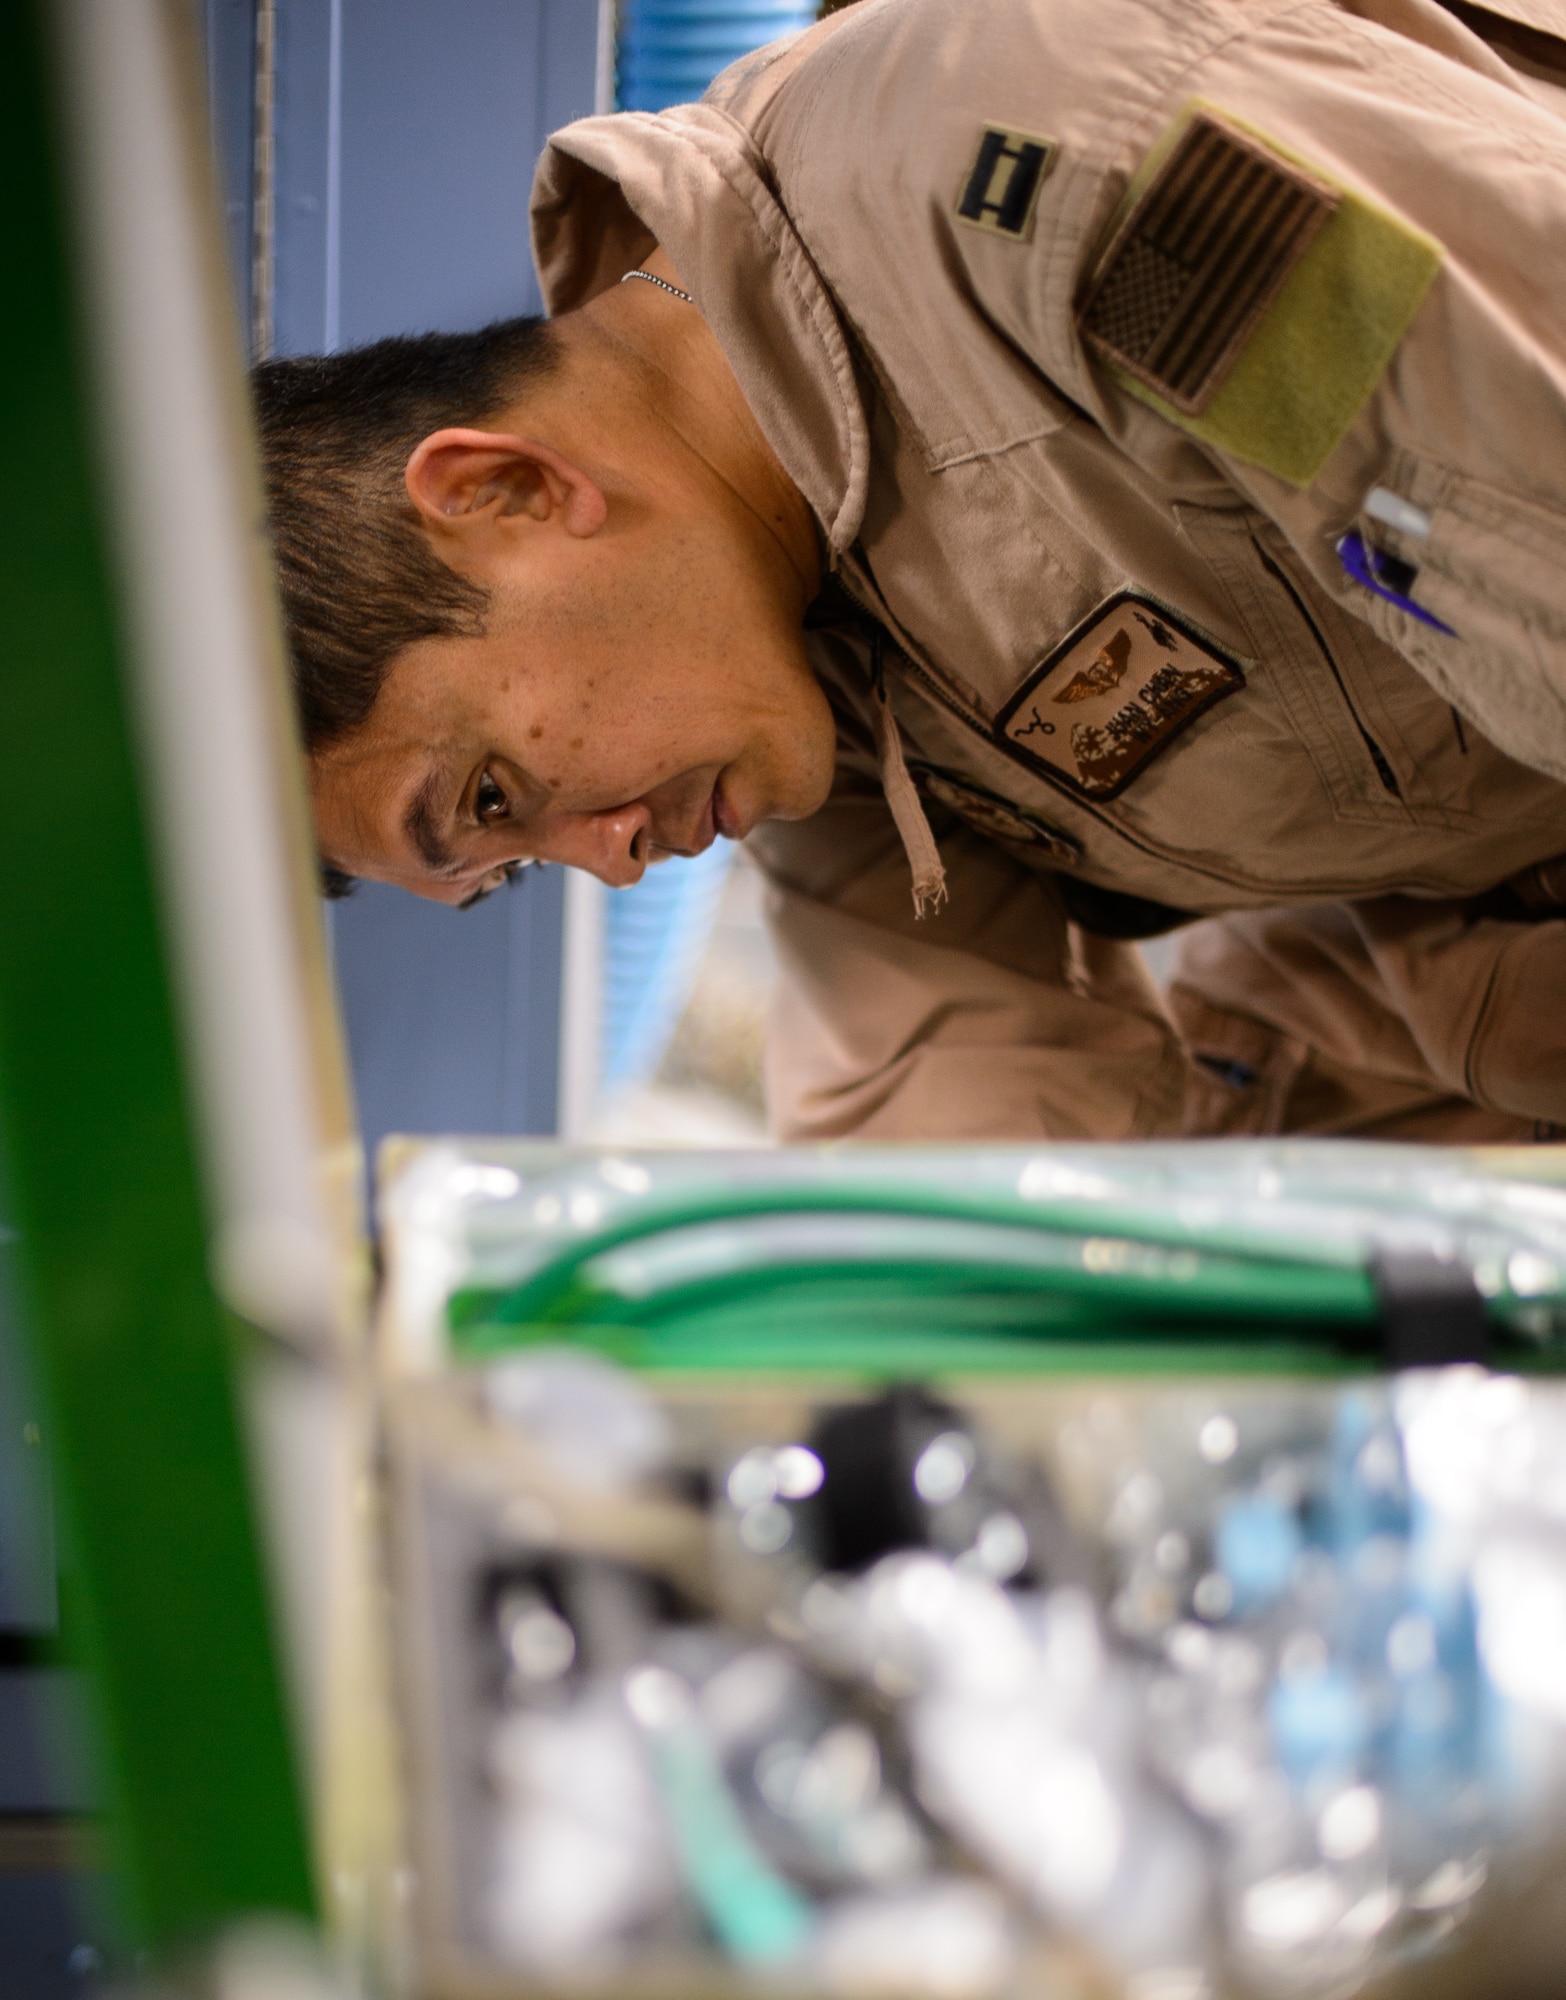 Capt. Juan Chan, 10th Expeditionary Aeromedical Evacuation Flight nurse, tests medical equipment prior to it becoming part of a C-17 Globemaster III flying ambulance Nov. 10, 2015, at Ramstein Air Base, Germany. Chan and several other Airmen brought injured service members from deployed locations to medical facilities in Germany and the U.S.  (U.S. Air Force photo/Staff Sgt. Armando A. Schwier-Morales)